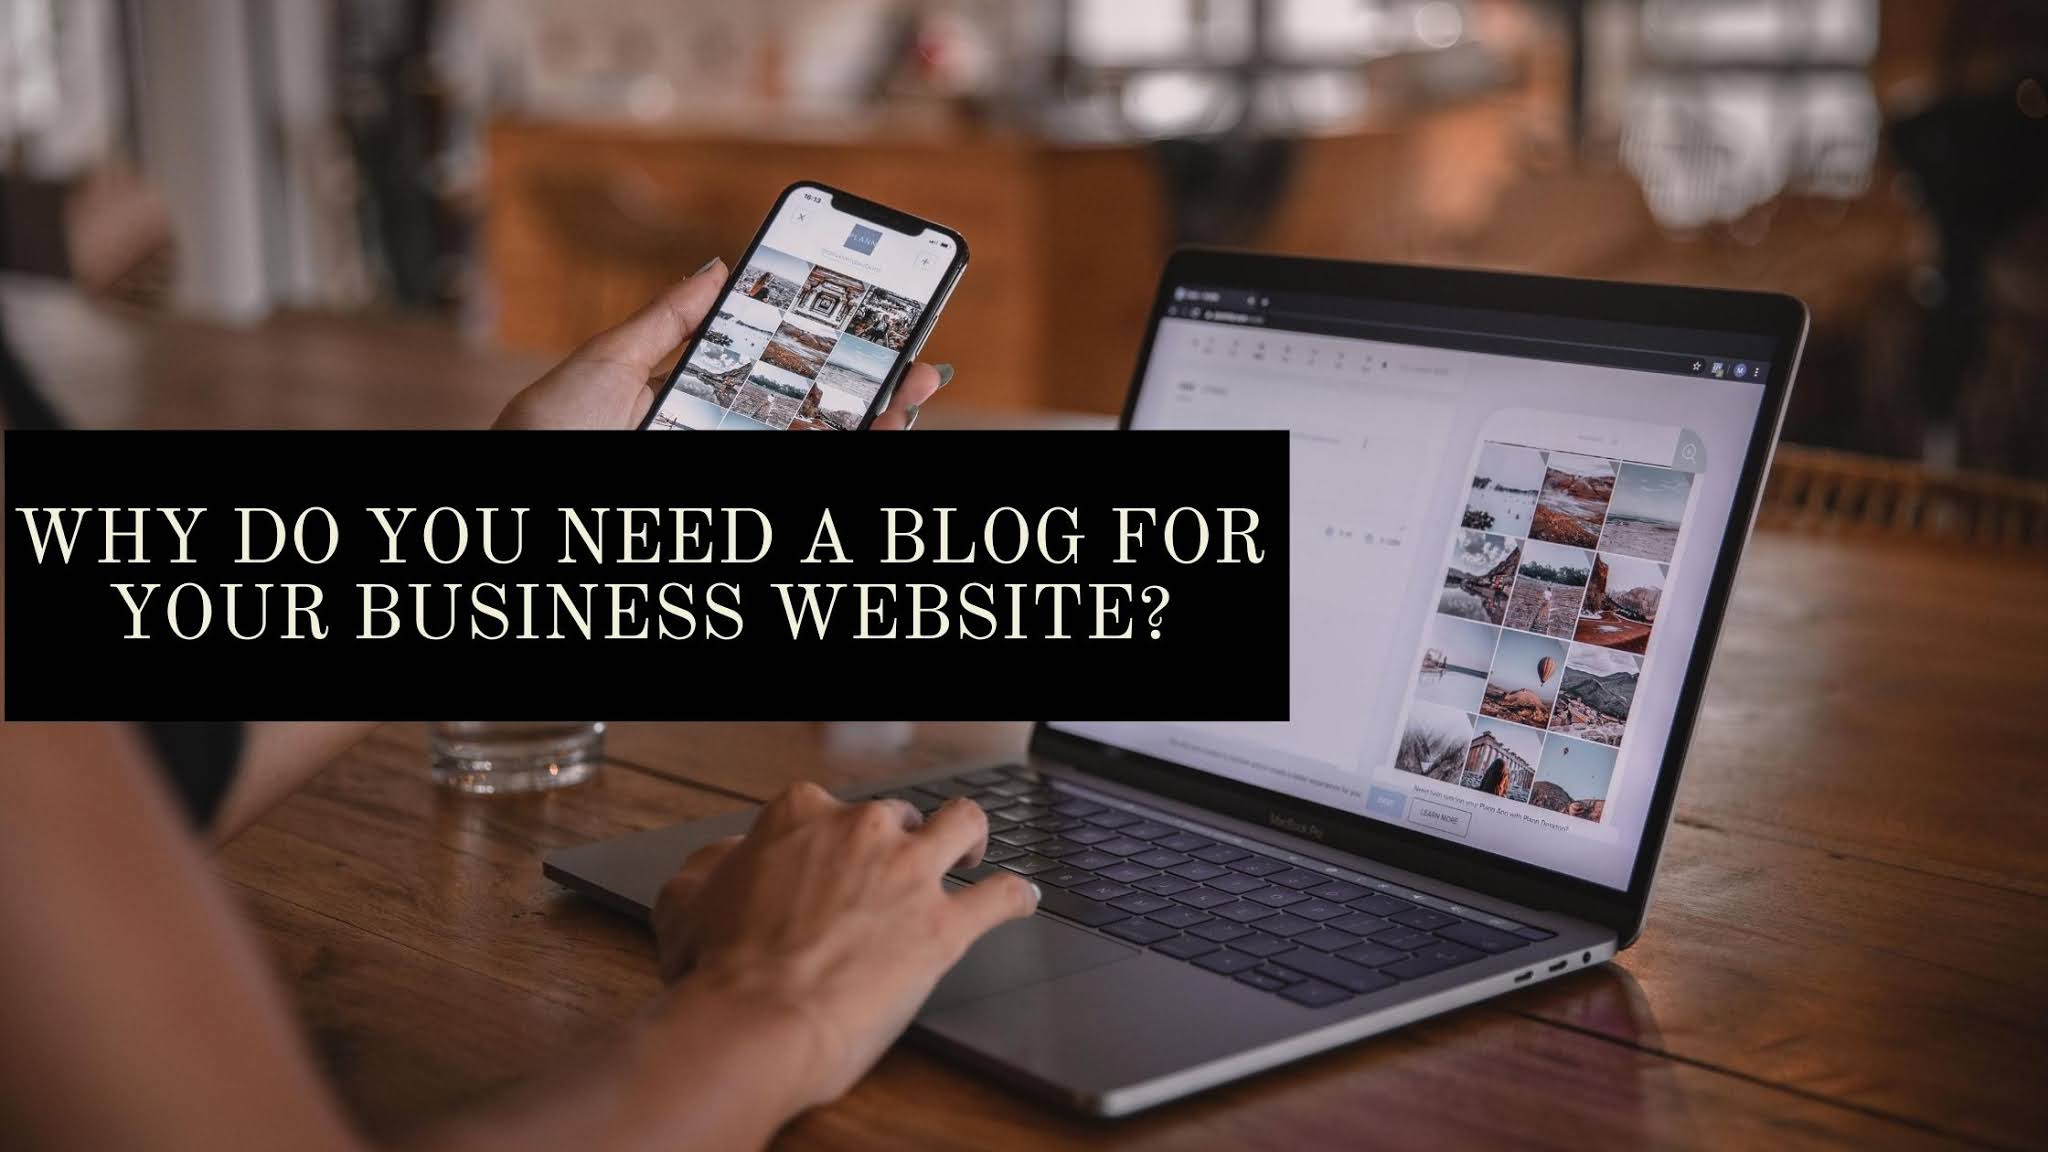 blogging is one of many important tasks as vetenarian